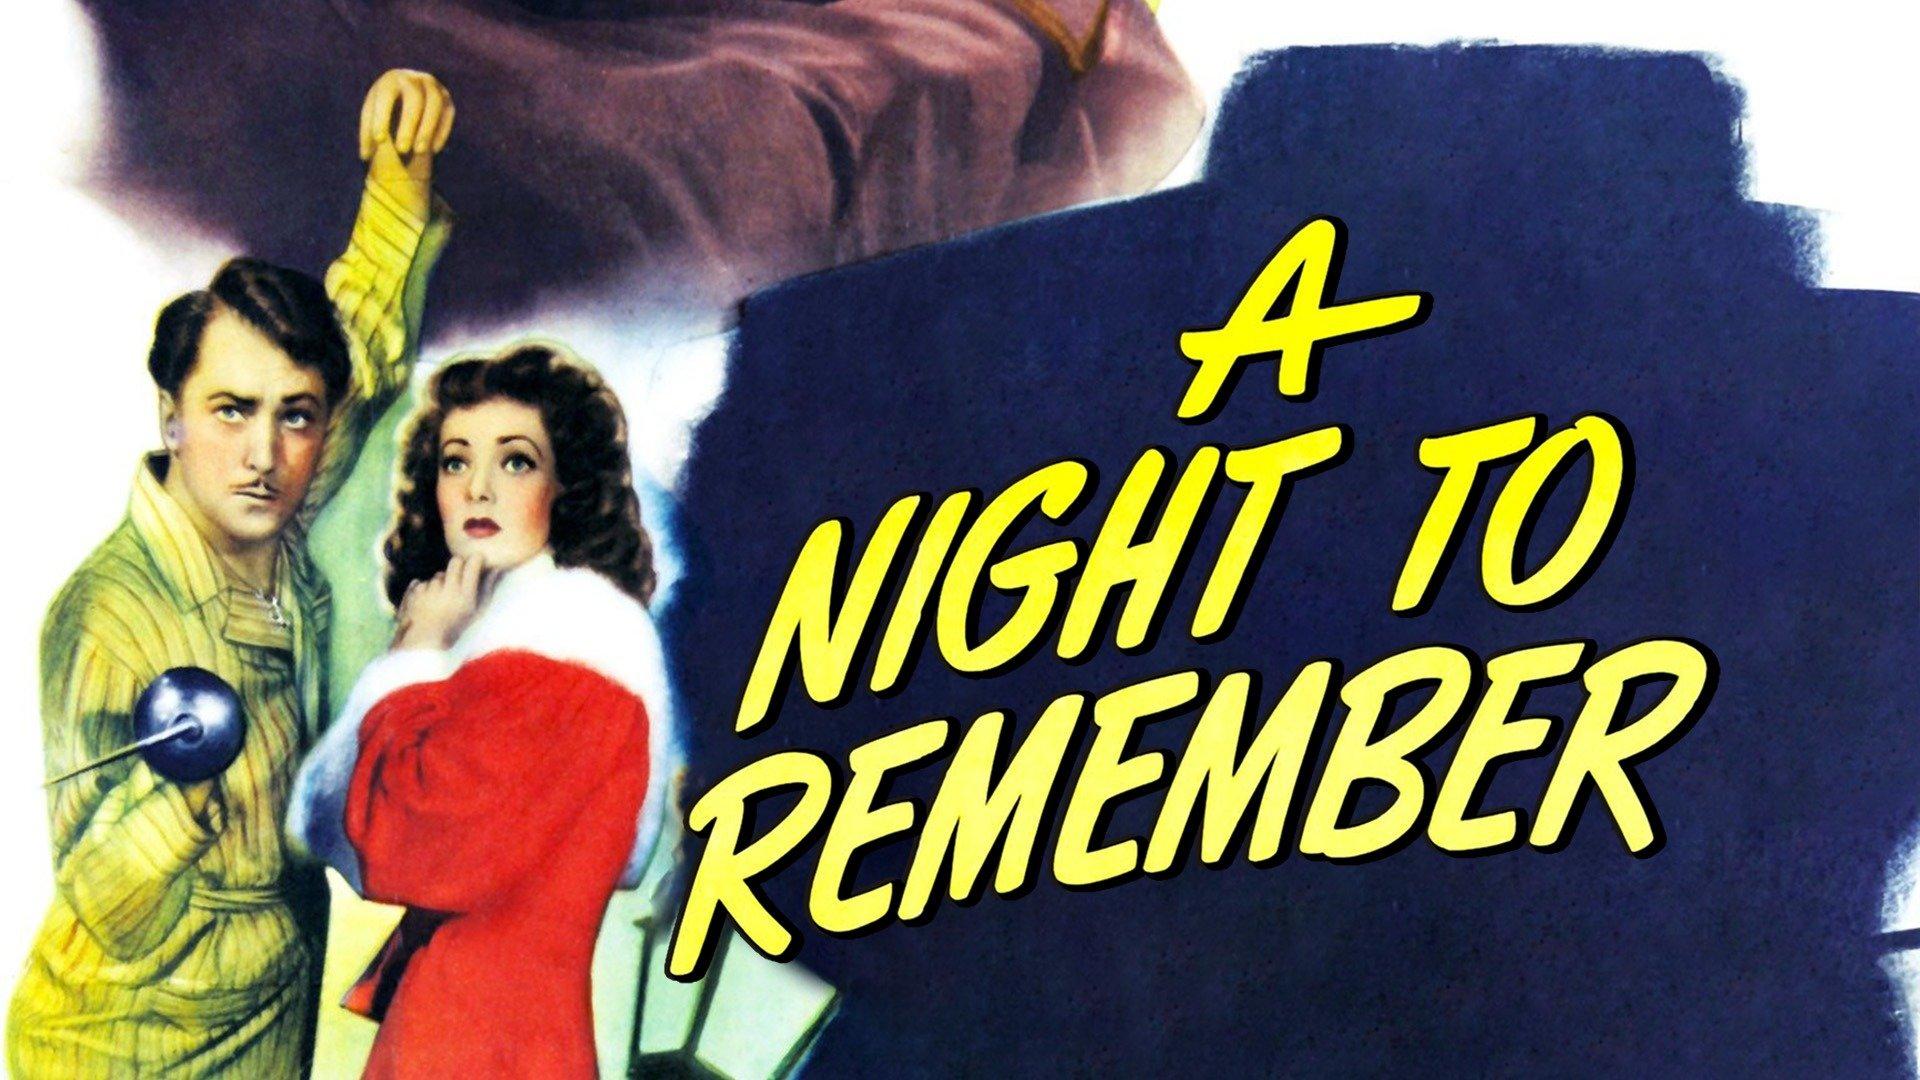 Watch A Night to Remember Streaming Online on Philo (Free Trial)